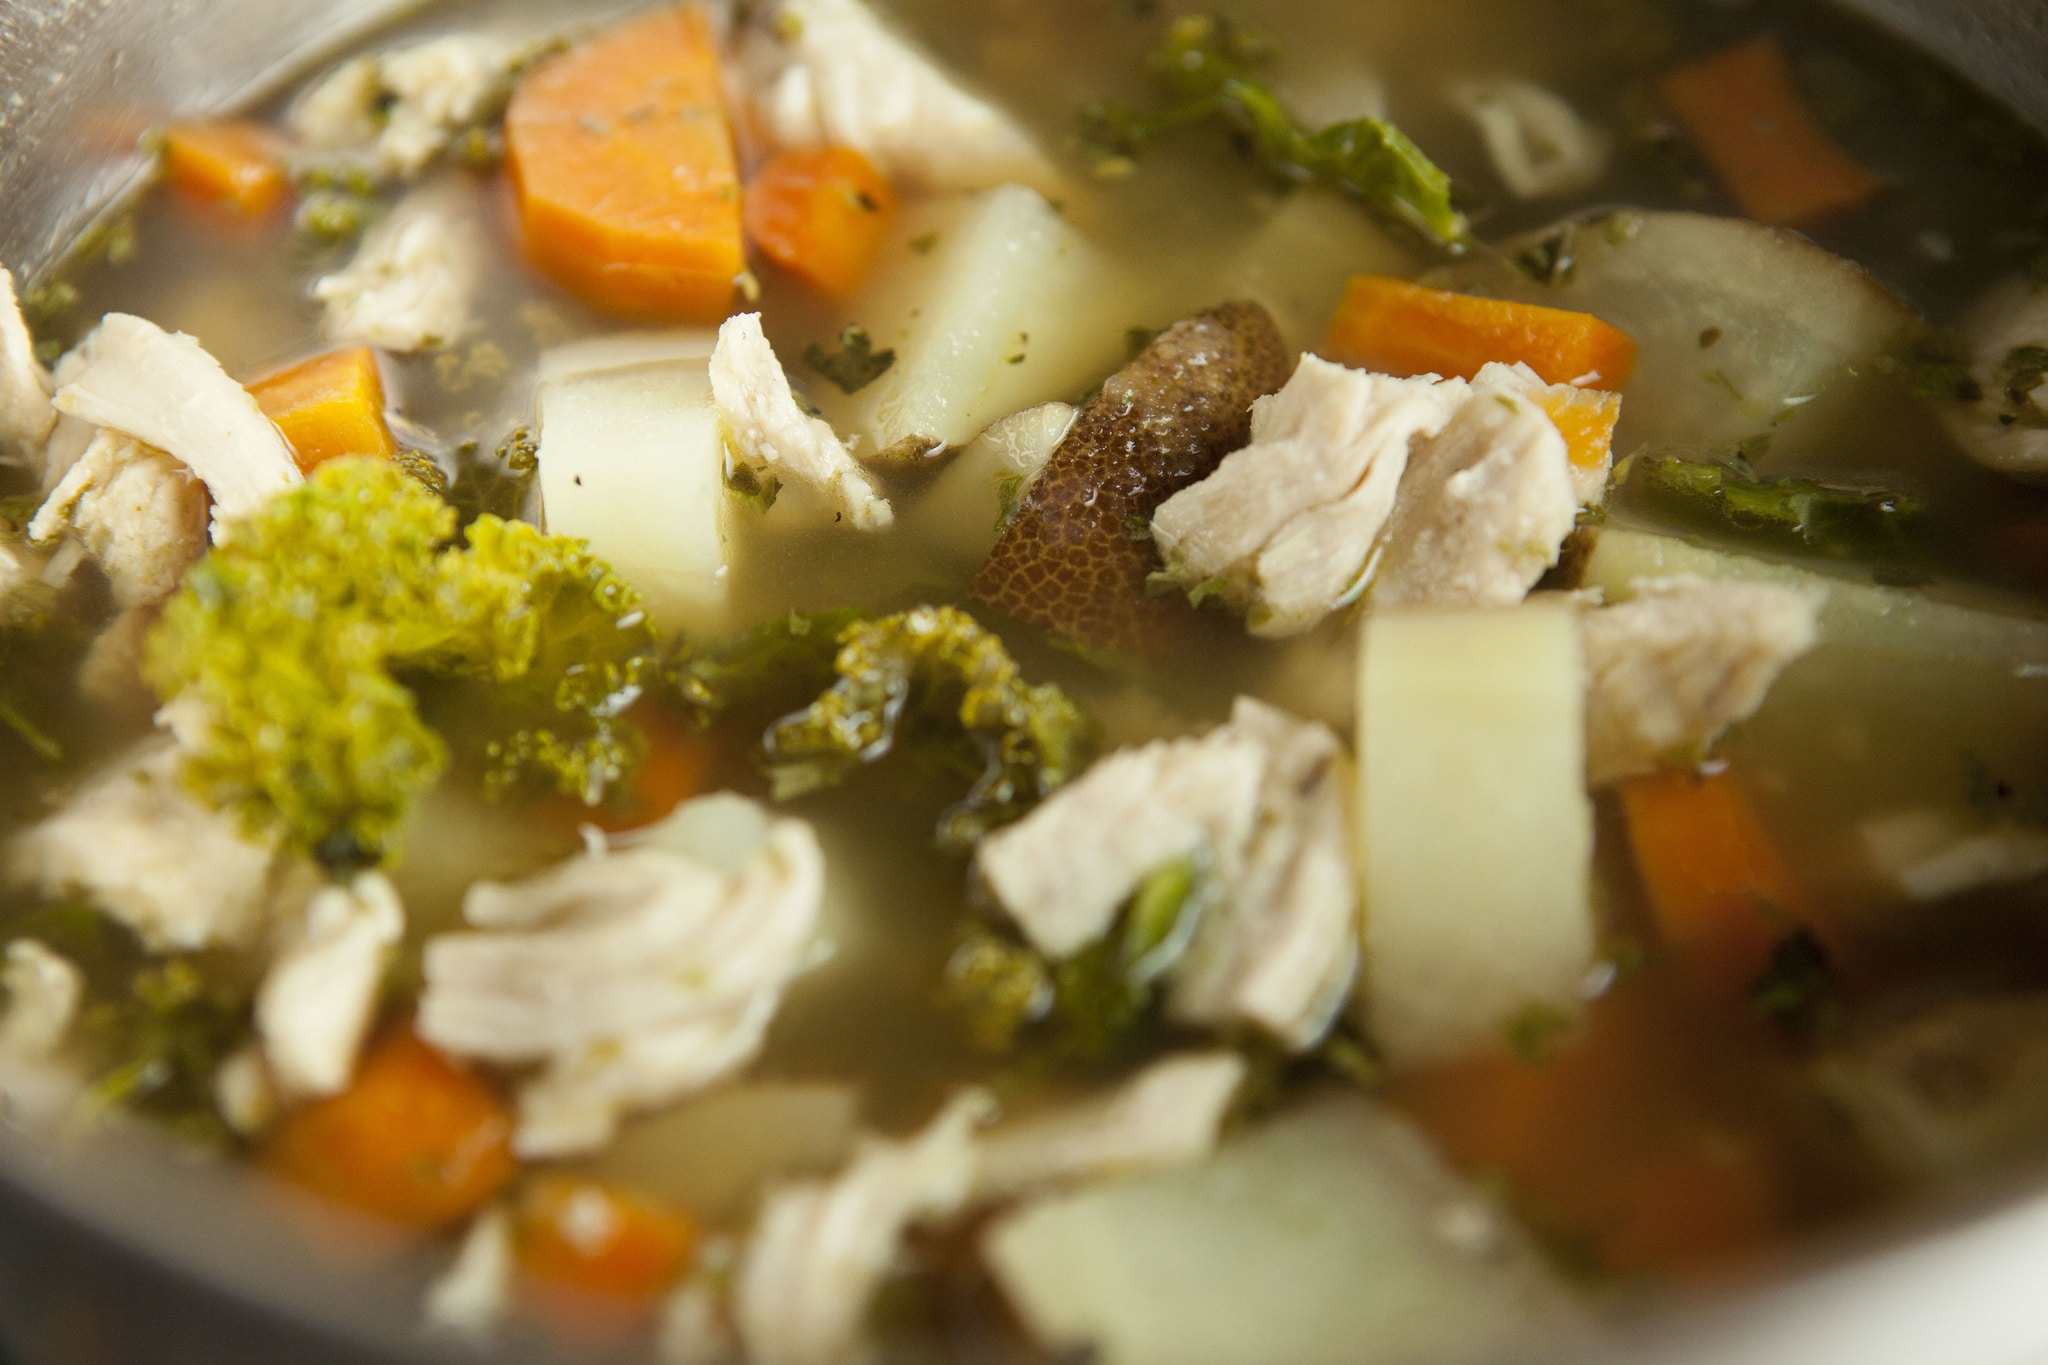 A easy Chicken Vegetable Soup recipe that is ready in 35 minutes. This is my family's favorite Winter soup that uses fresh vegetables! We use Instant Potatoes to make the broth more creamy!